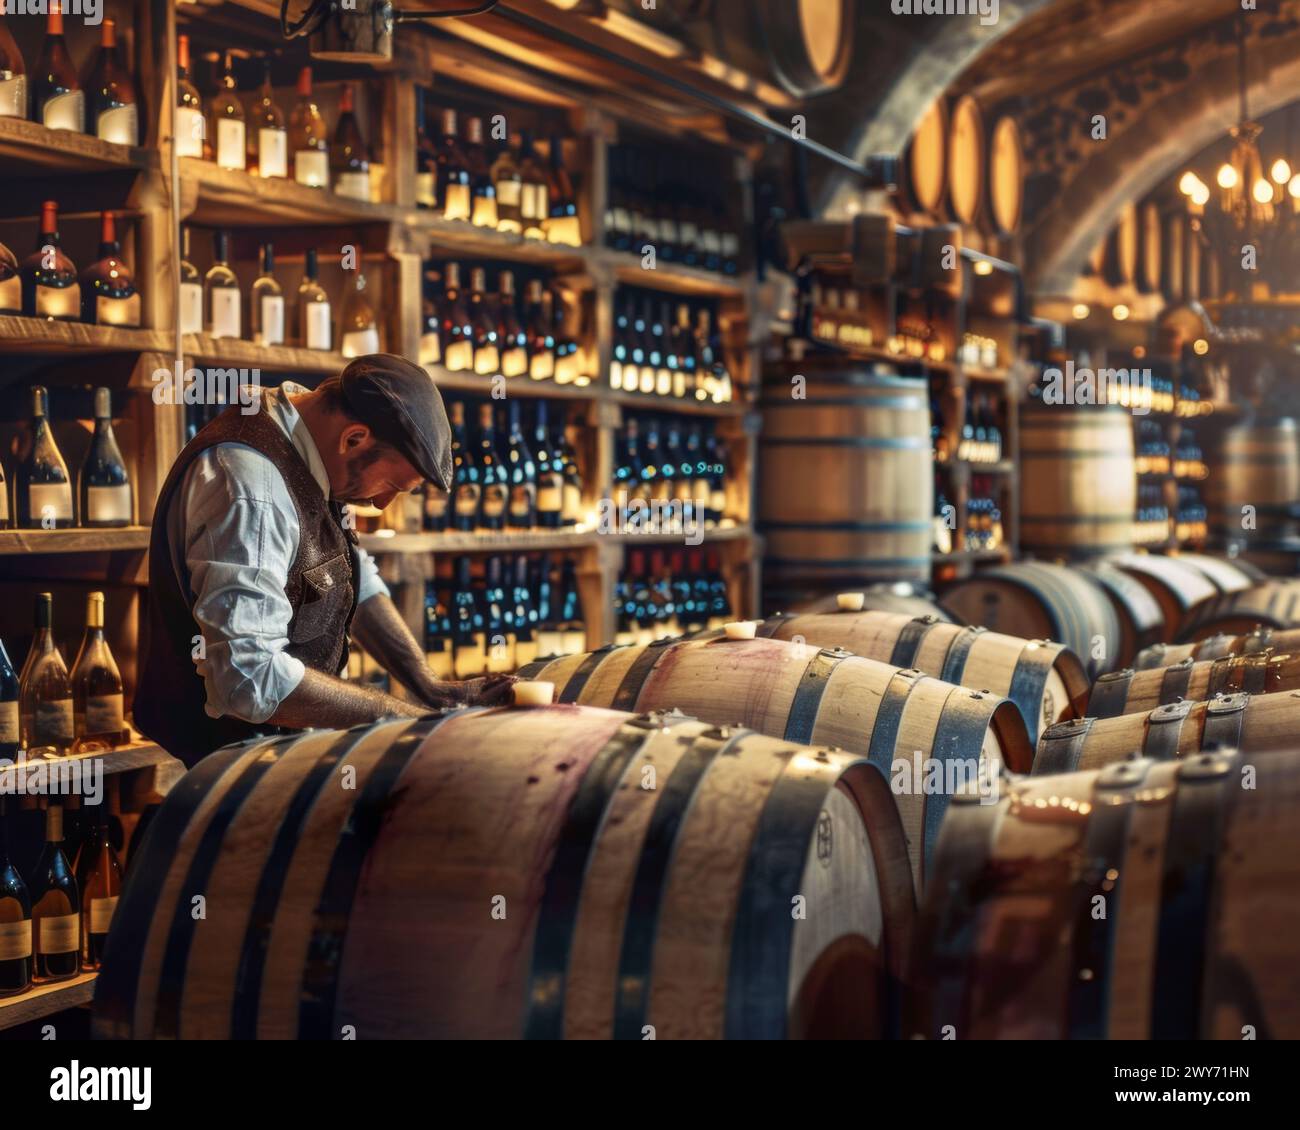 A man is standing among barrels filled with wine. Stock Photo